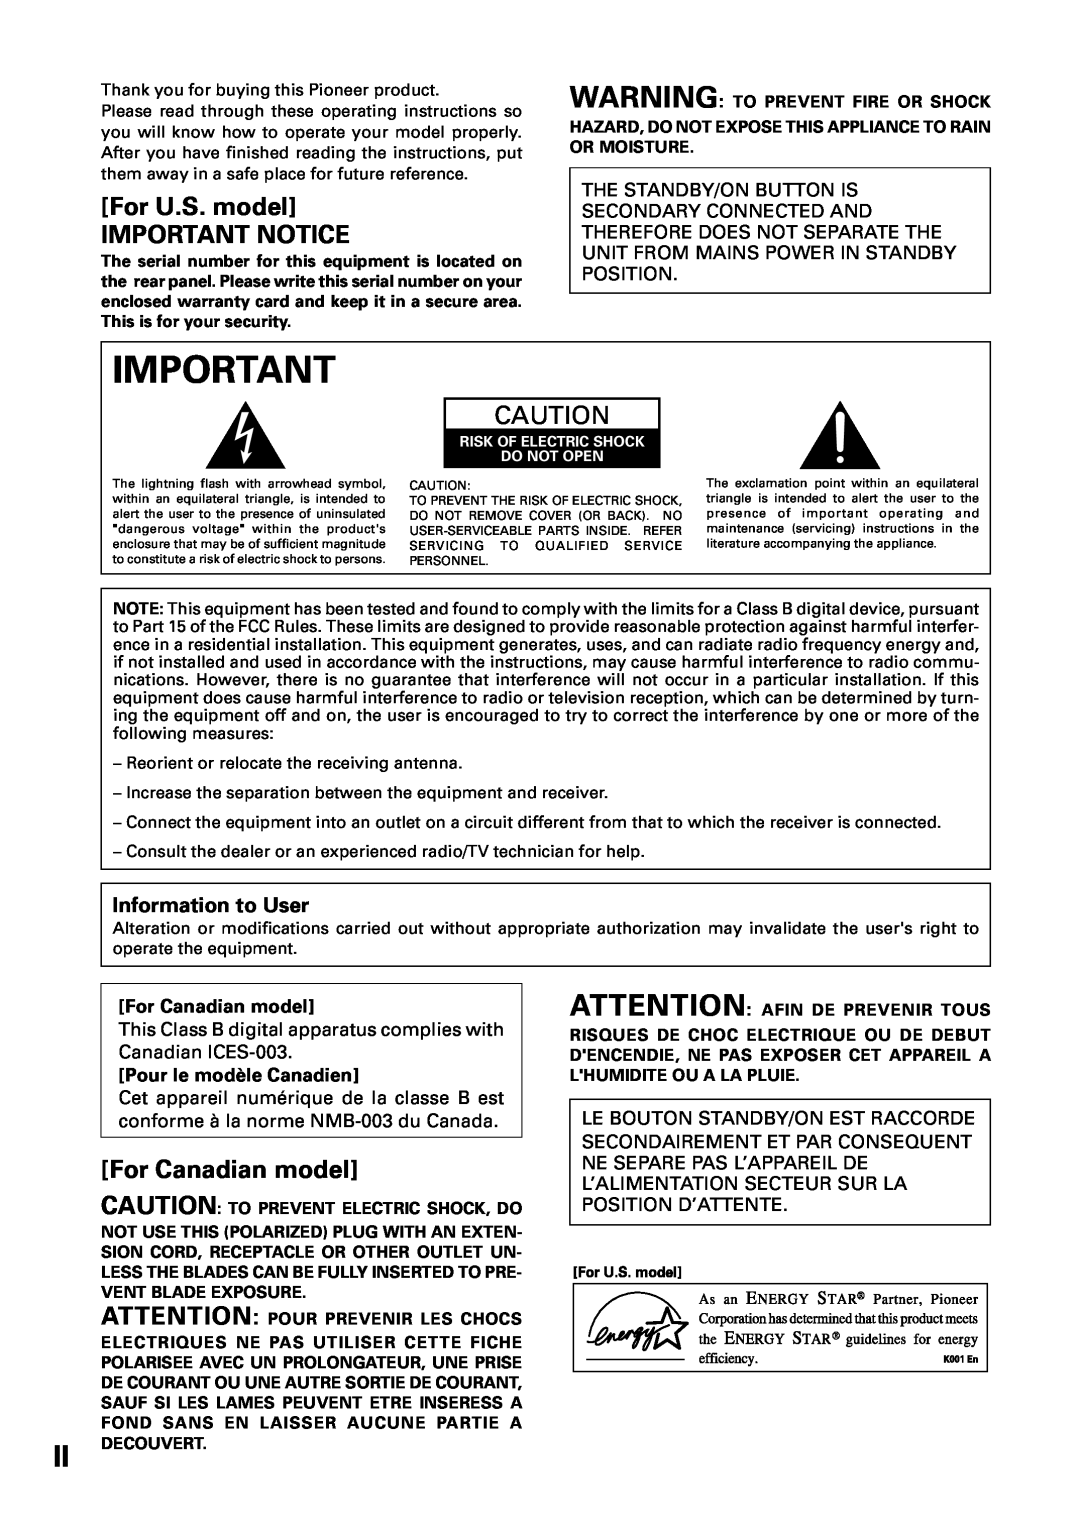 Pioneer VSX-36TX manual For U.S. model IMPORTANT NOTICE, For Canadian model, Information to User, Pour le modèle Canadien 